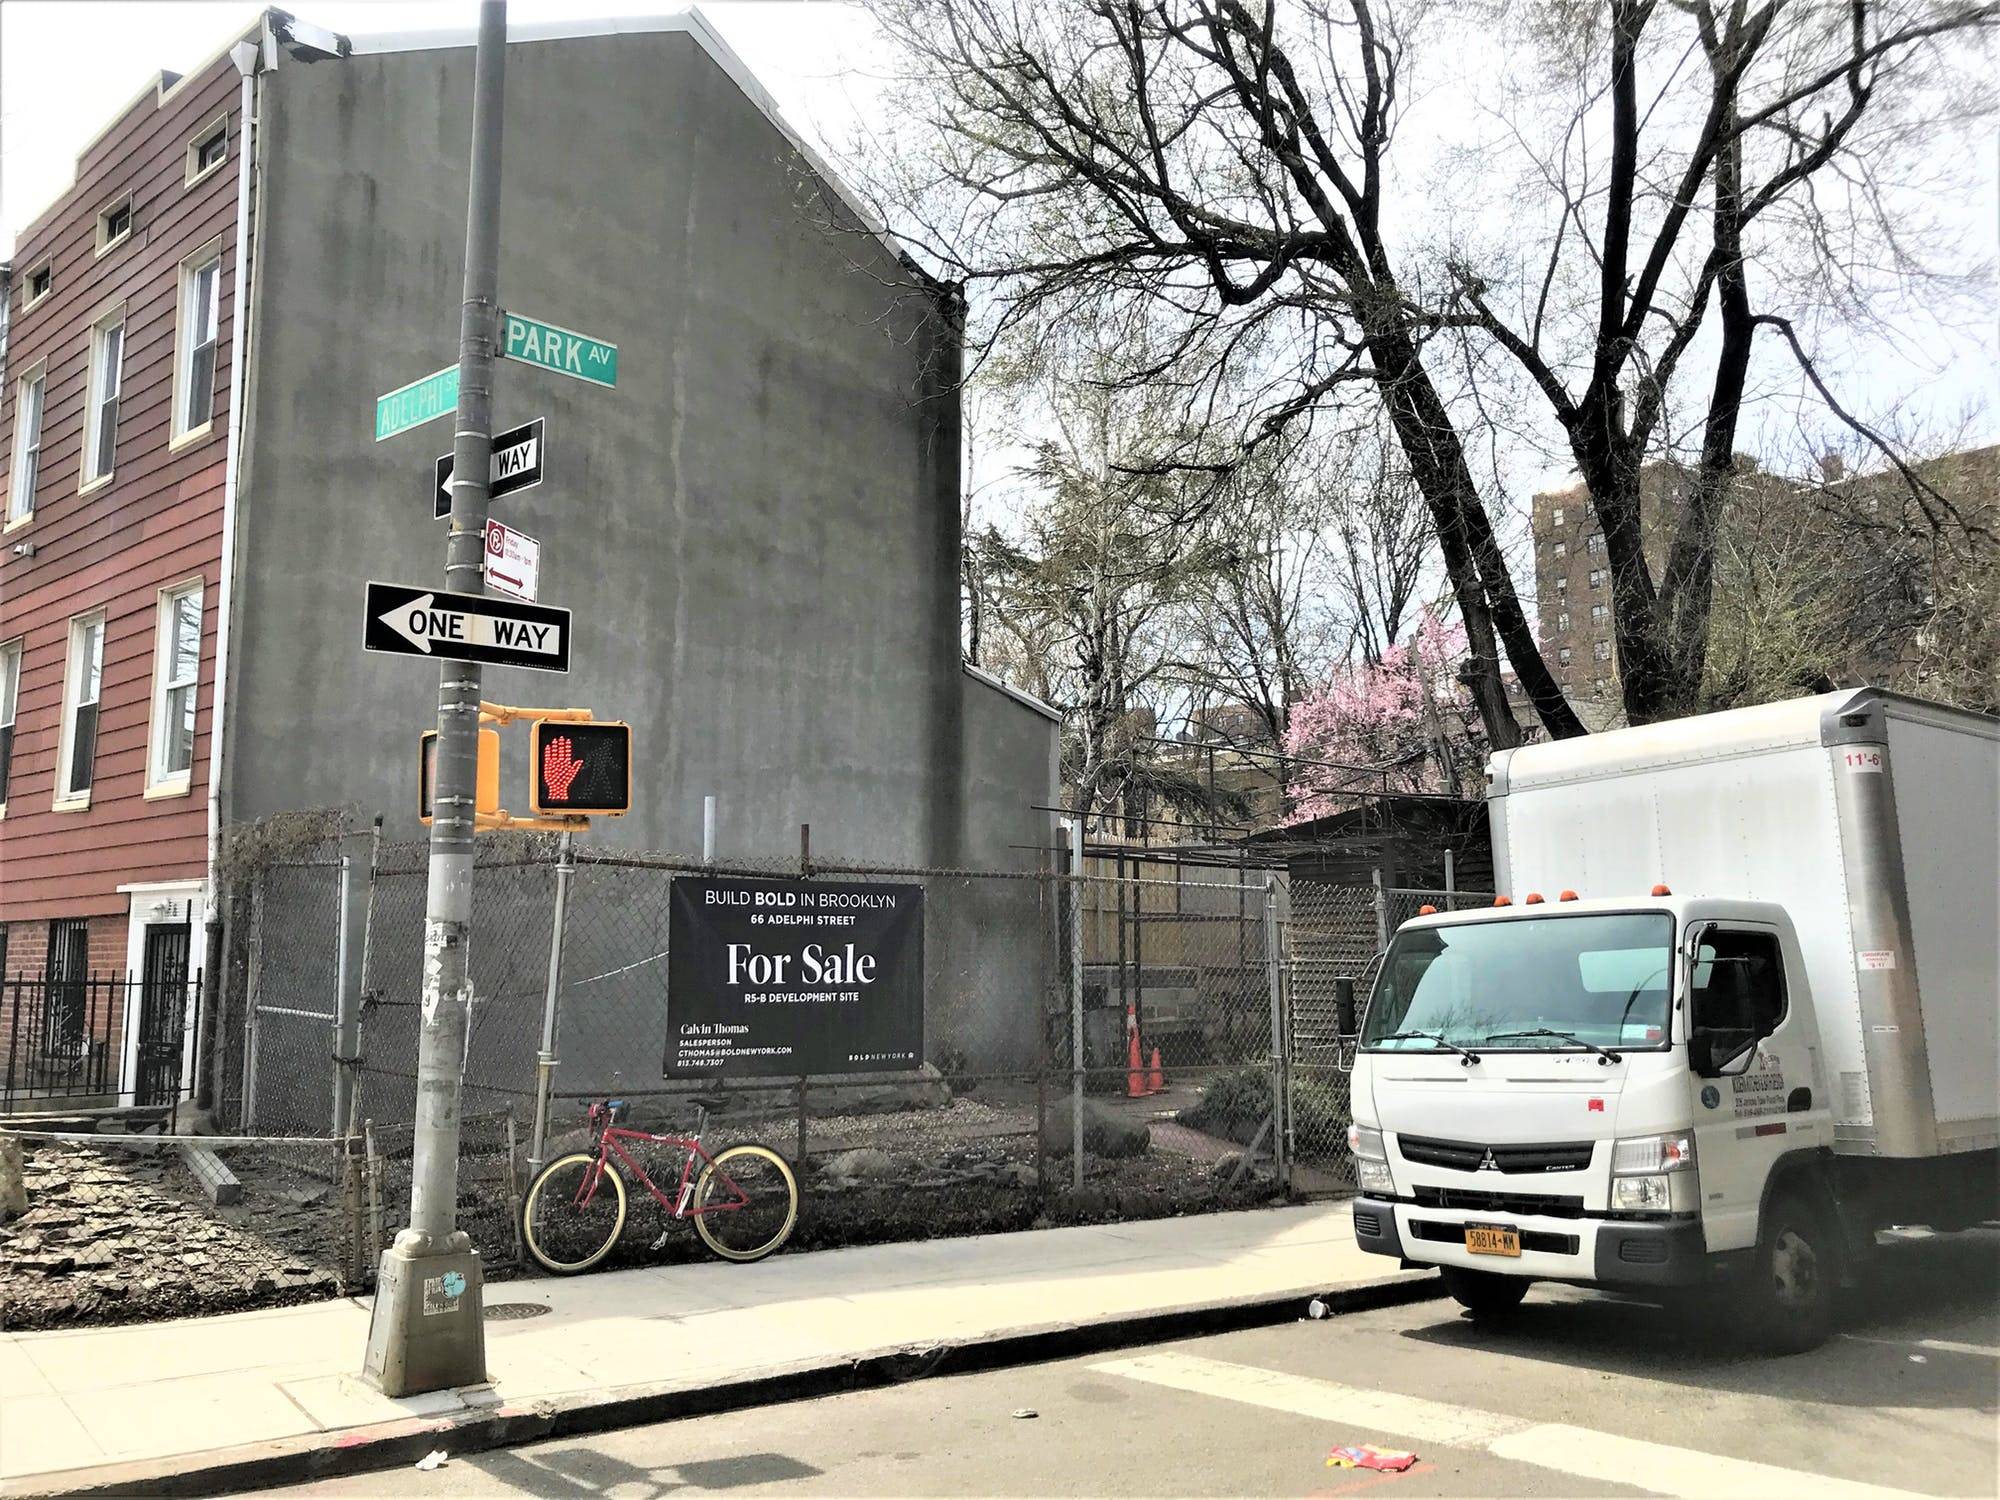 An opportunity for investment in Fort Greene on the corner of Adelphi Street and Park Avenue is available now.